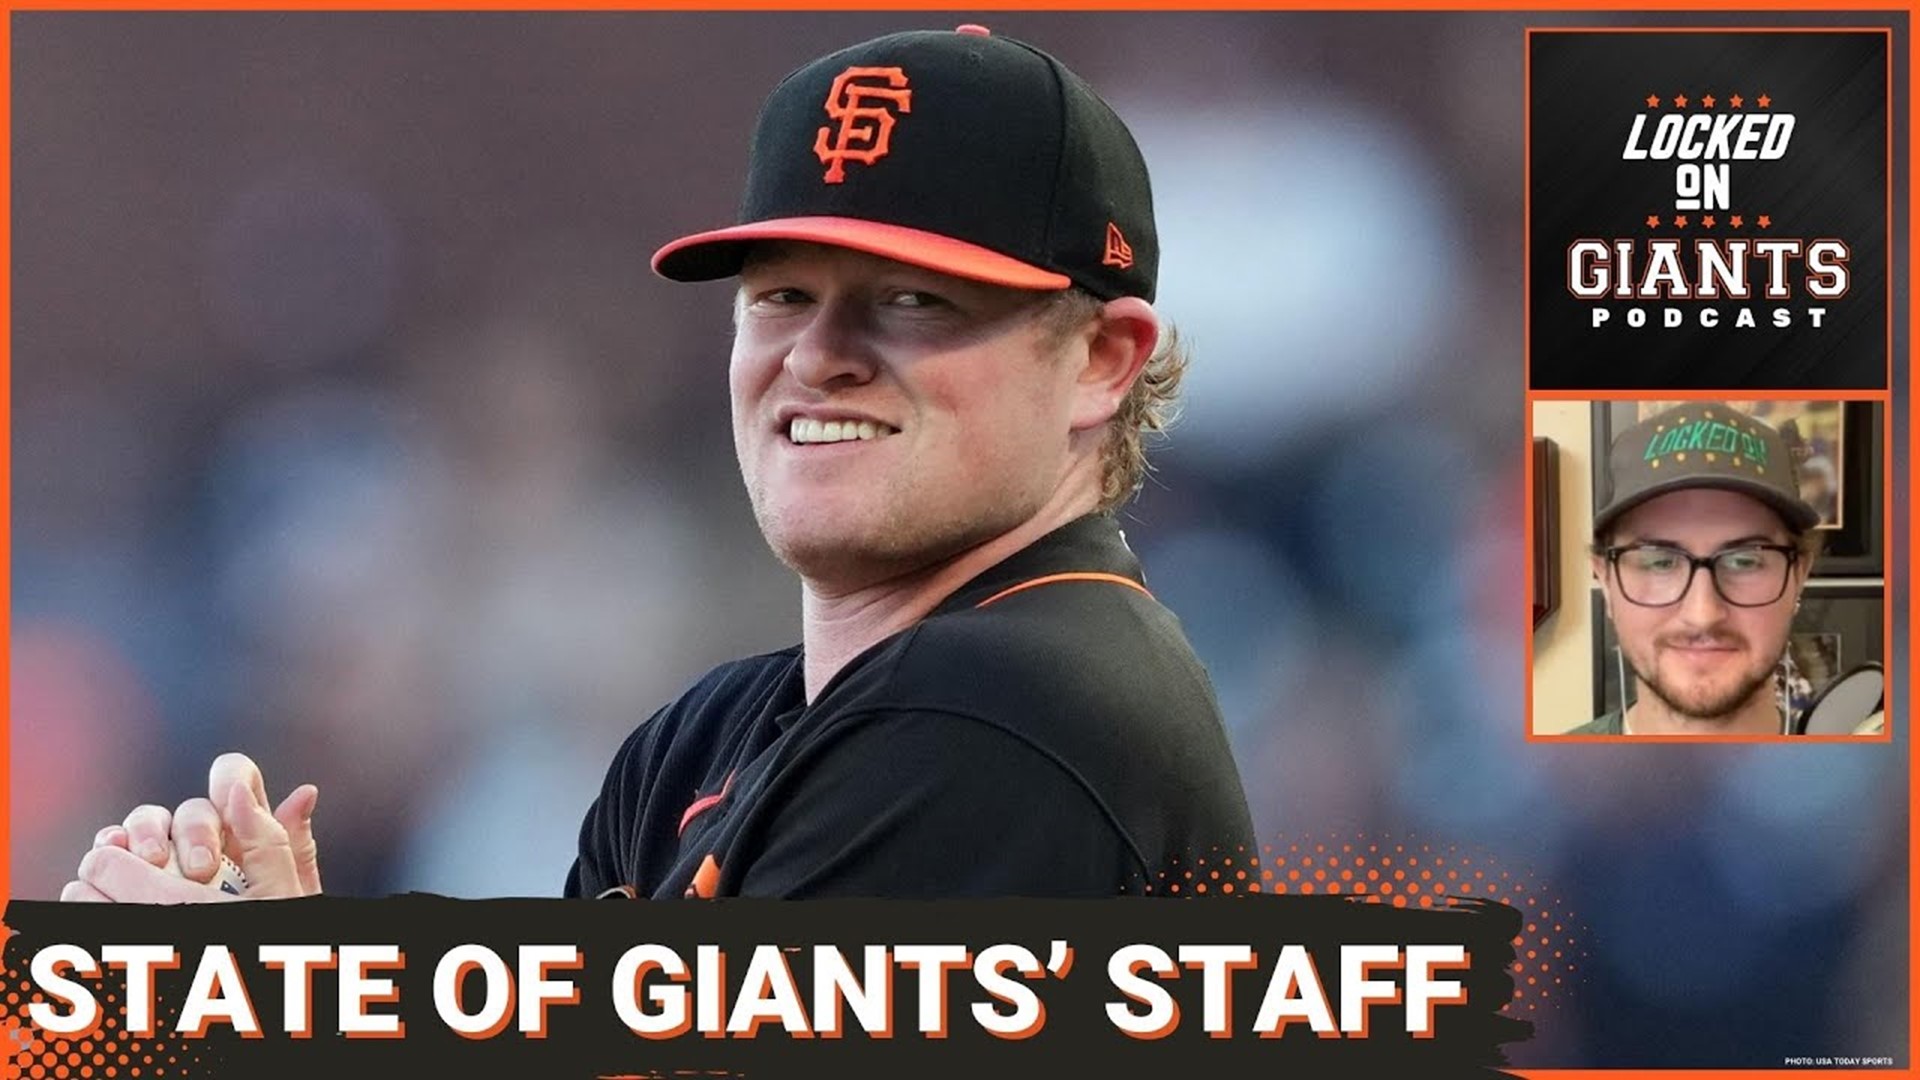 Who is the face of SF Giants?